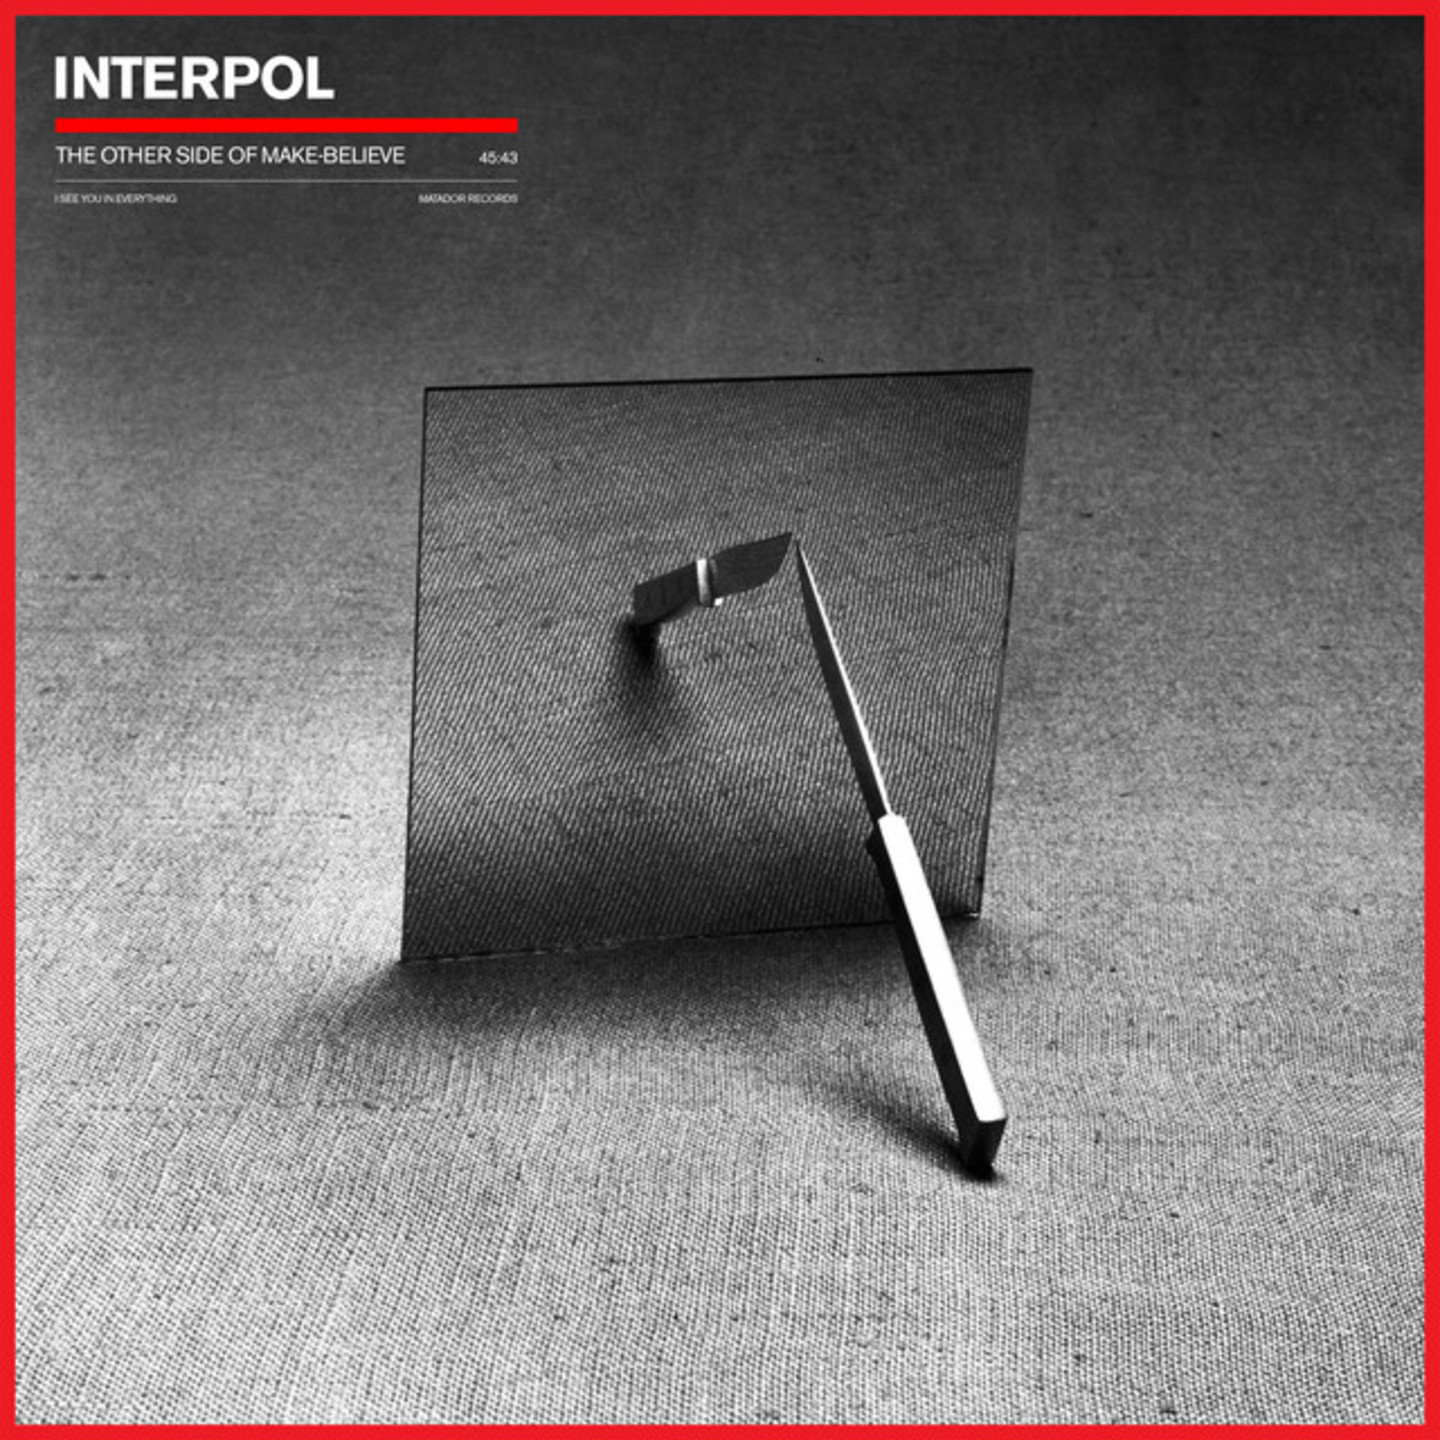 INTERPOL - The Other Side of Make-Believe LP Indie Exclusive Red Vinyl